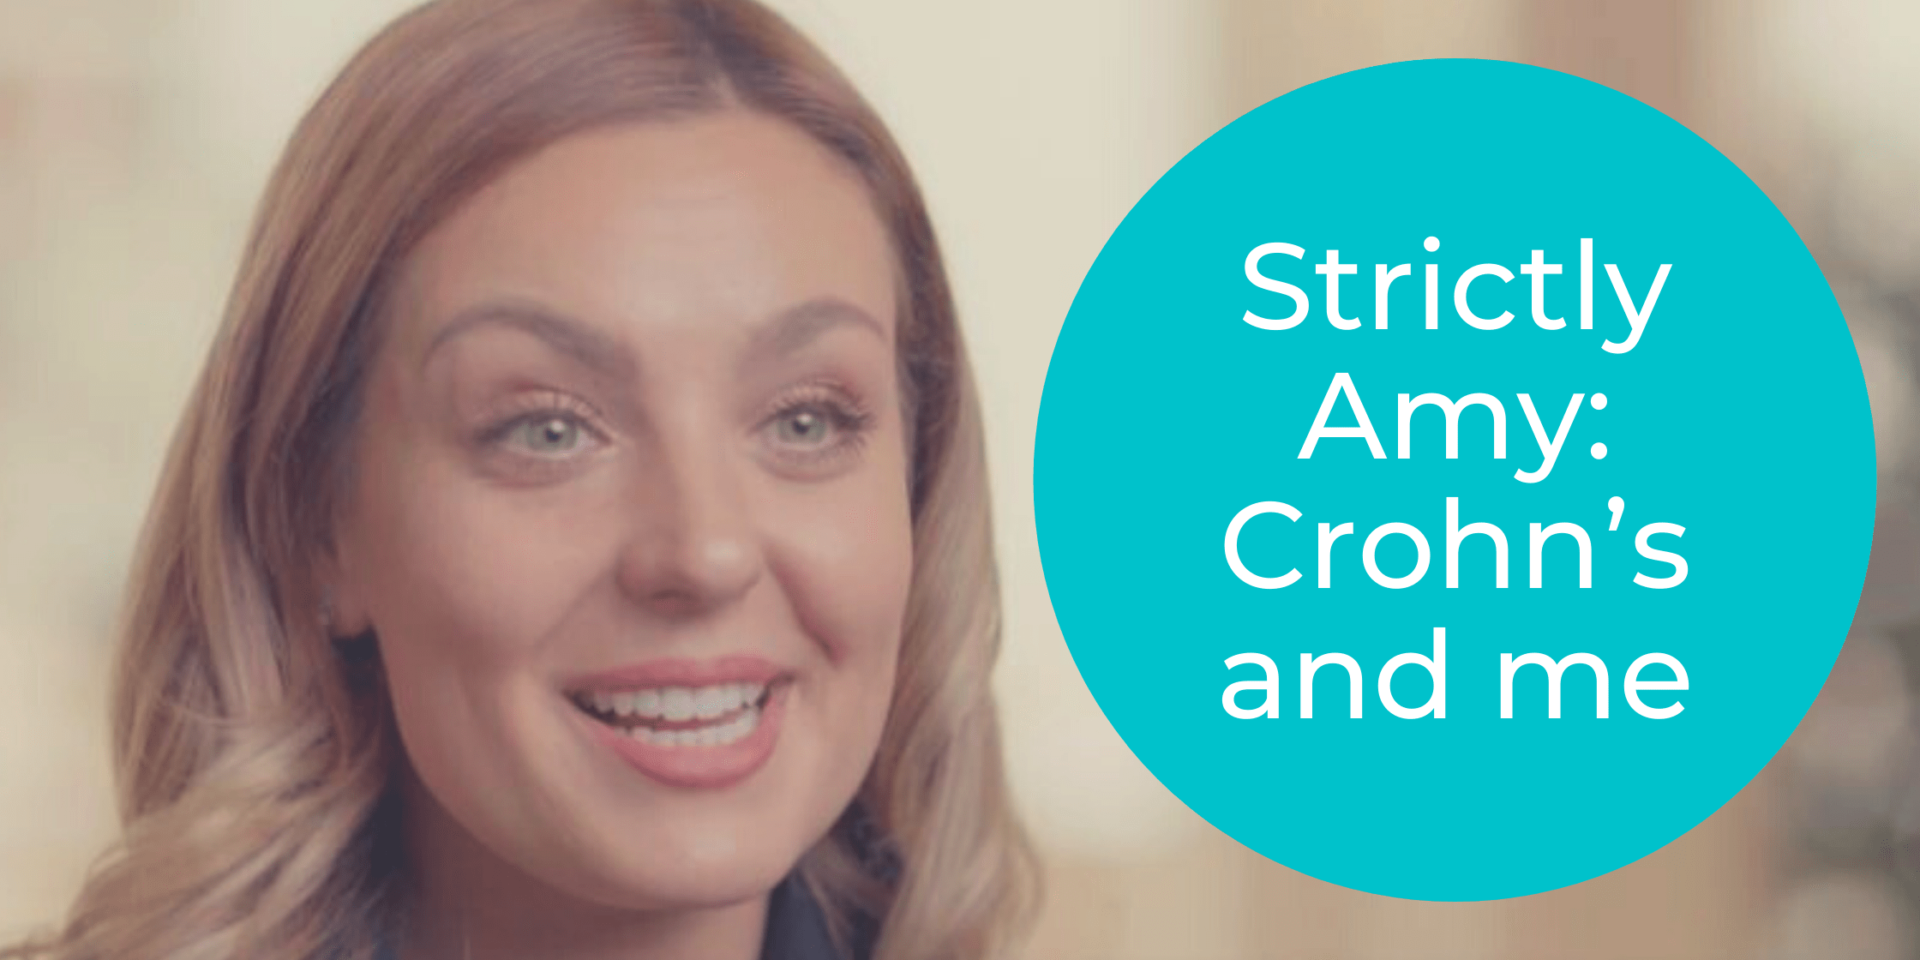 Strictly Amy: Crohn’s and me | The Insurance Surgery